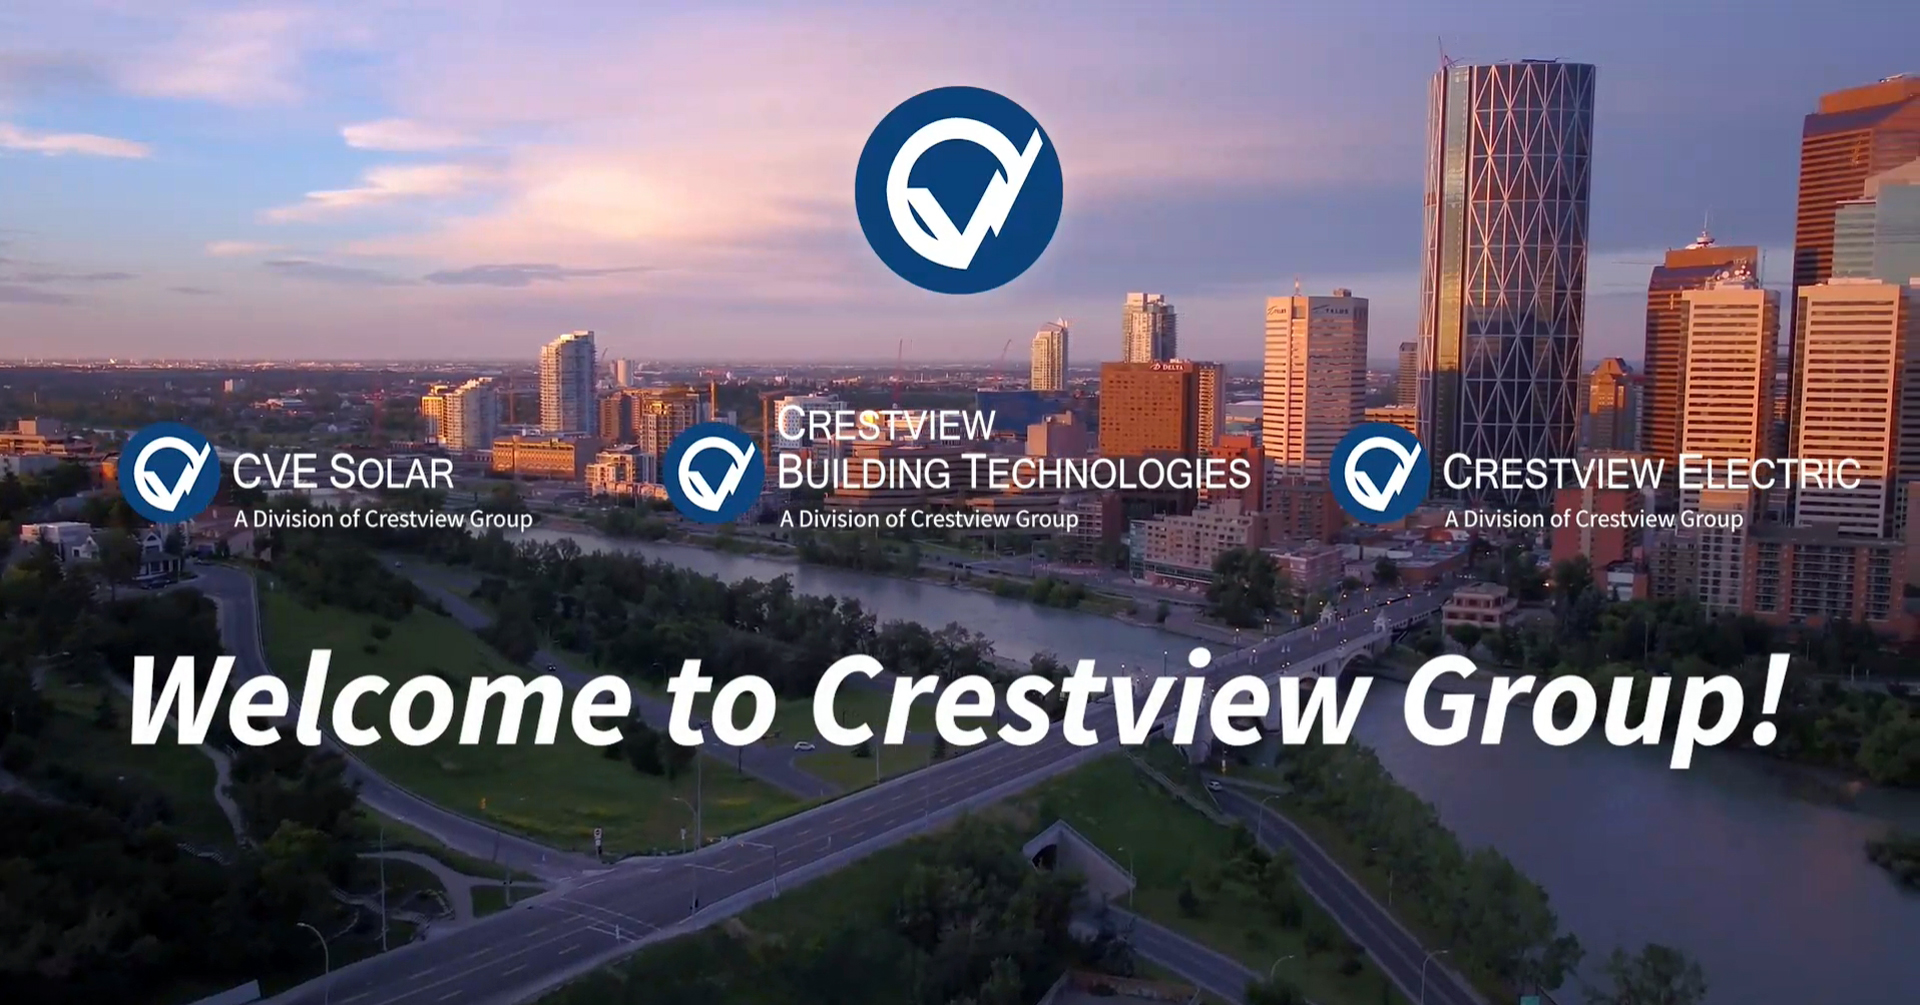 Crestview-Group-Orientation-Guide-2020